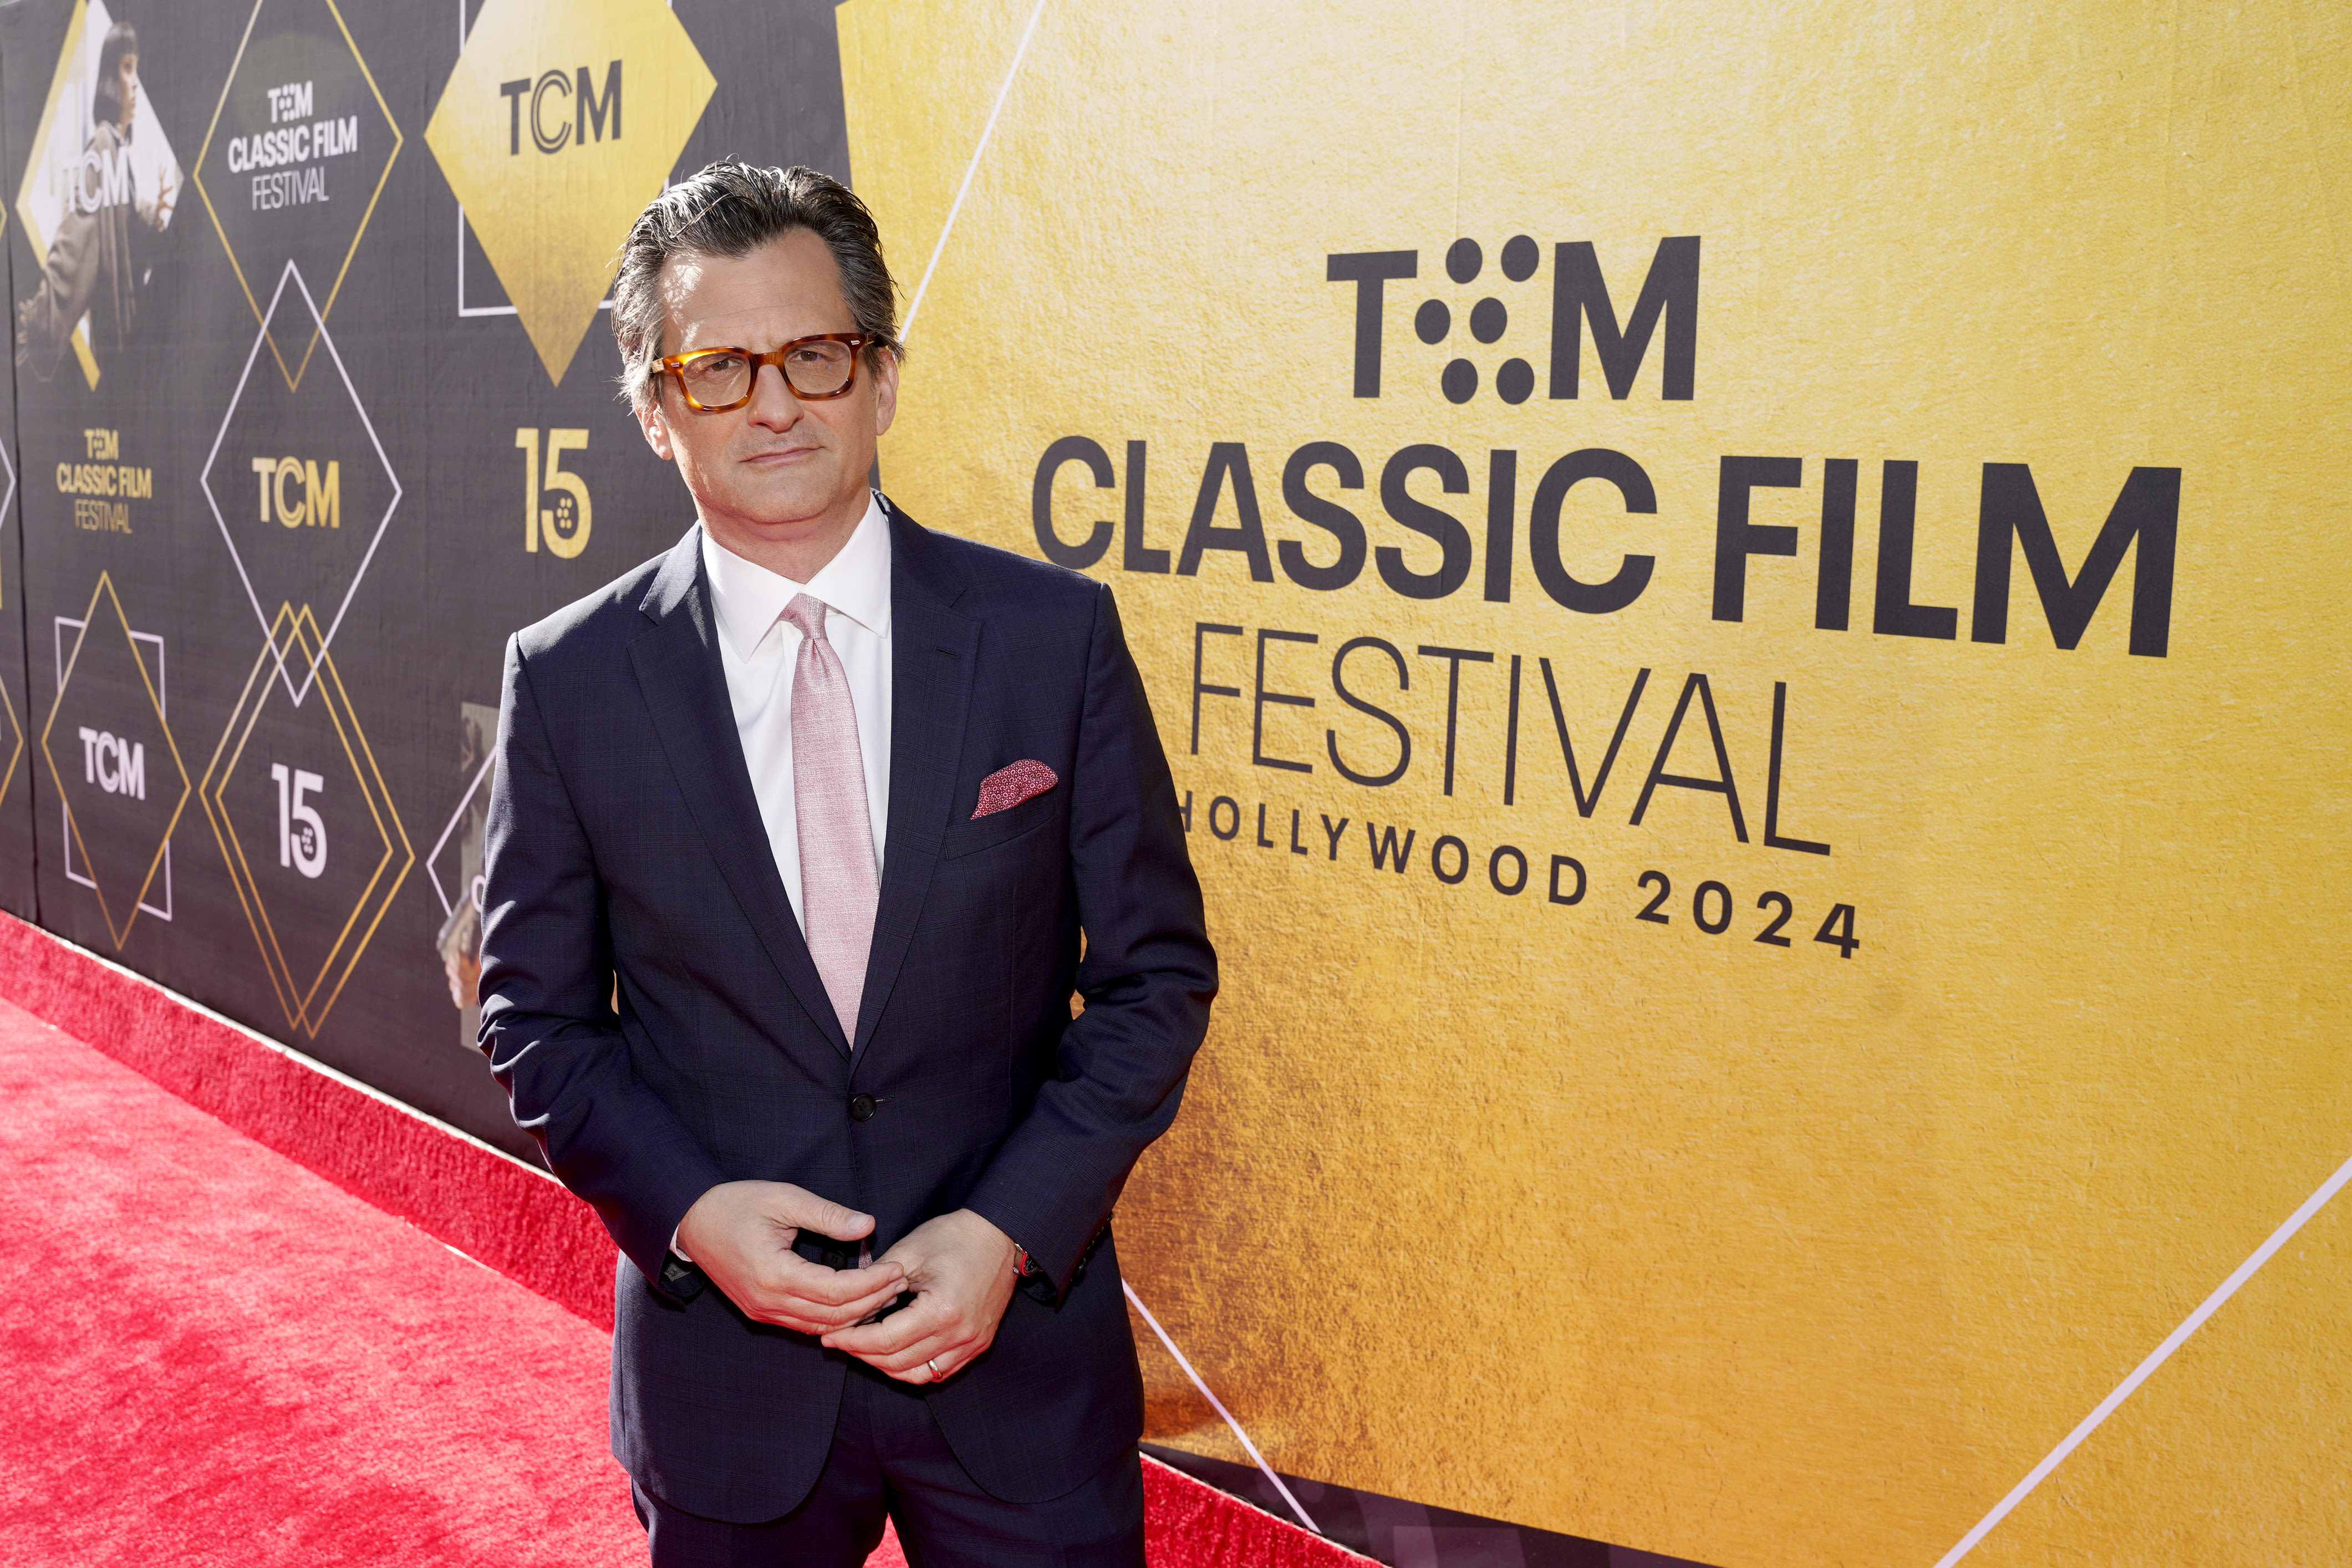 TCM’s Ben Mankiewicz Discusses the New Season of ‘The Plot Thickens’ Podcast: John Ford ‘Was More Human Than Any of Us’